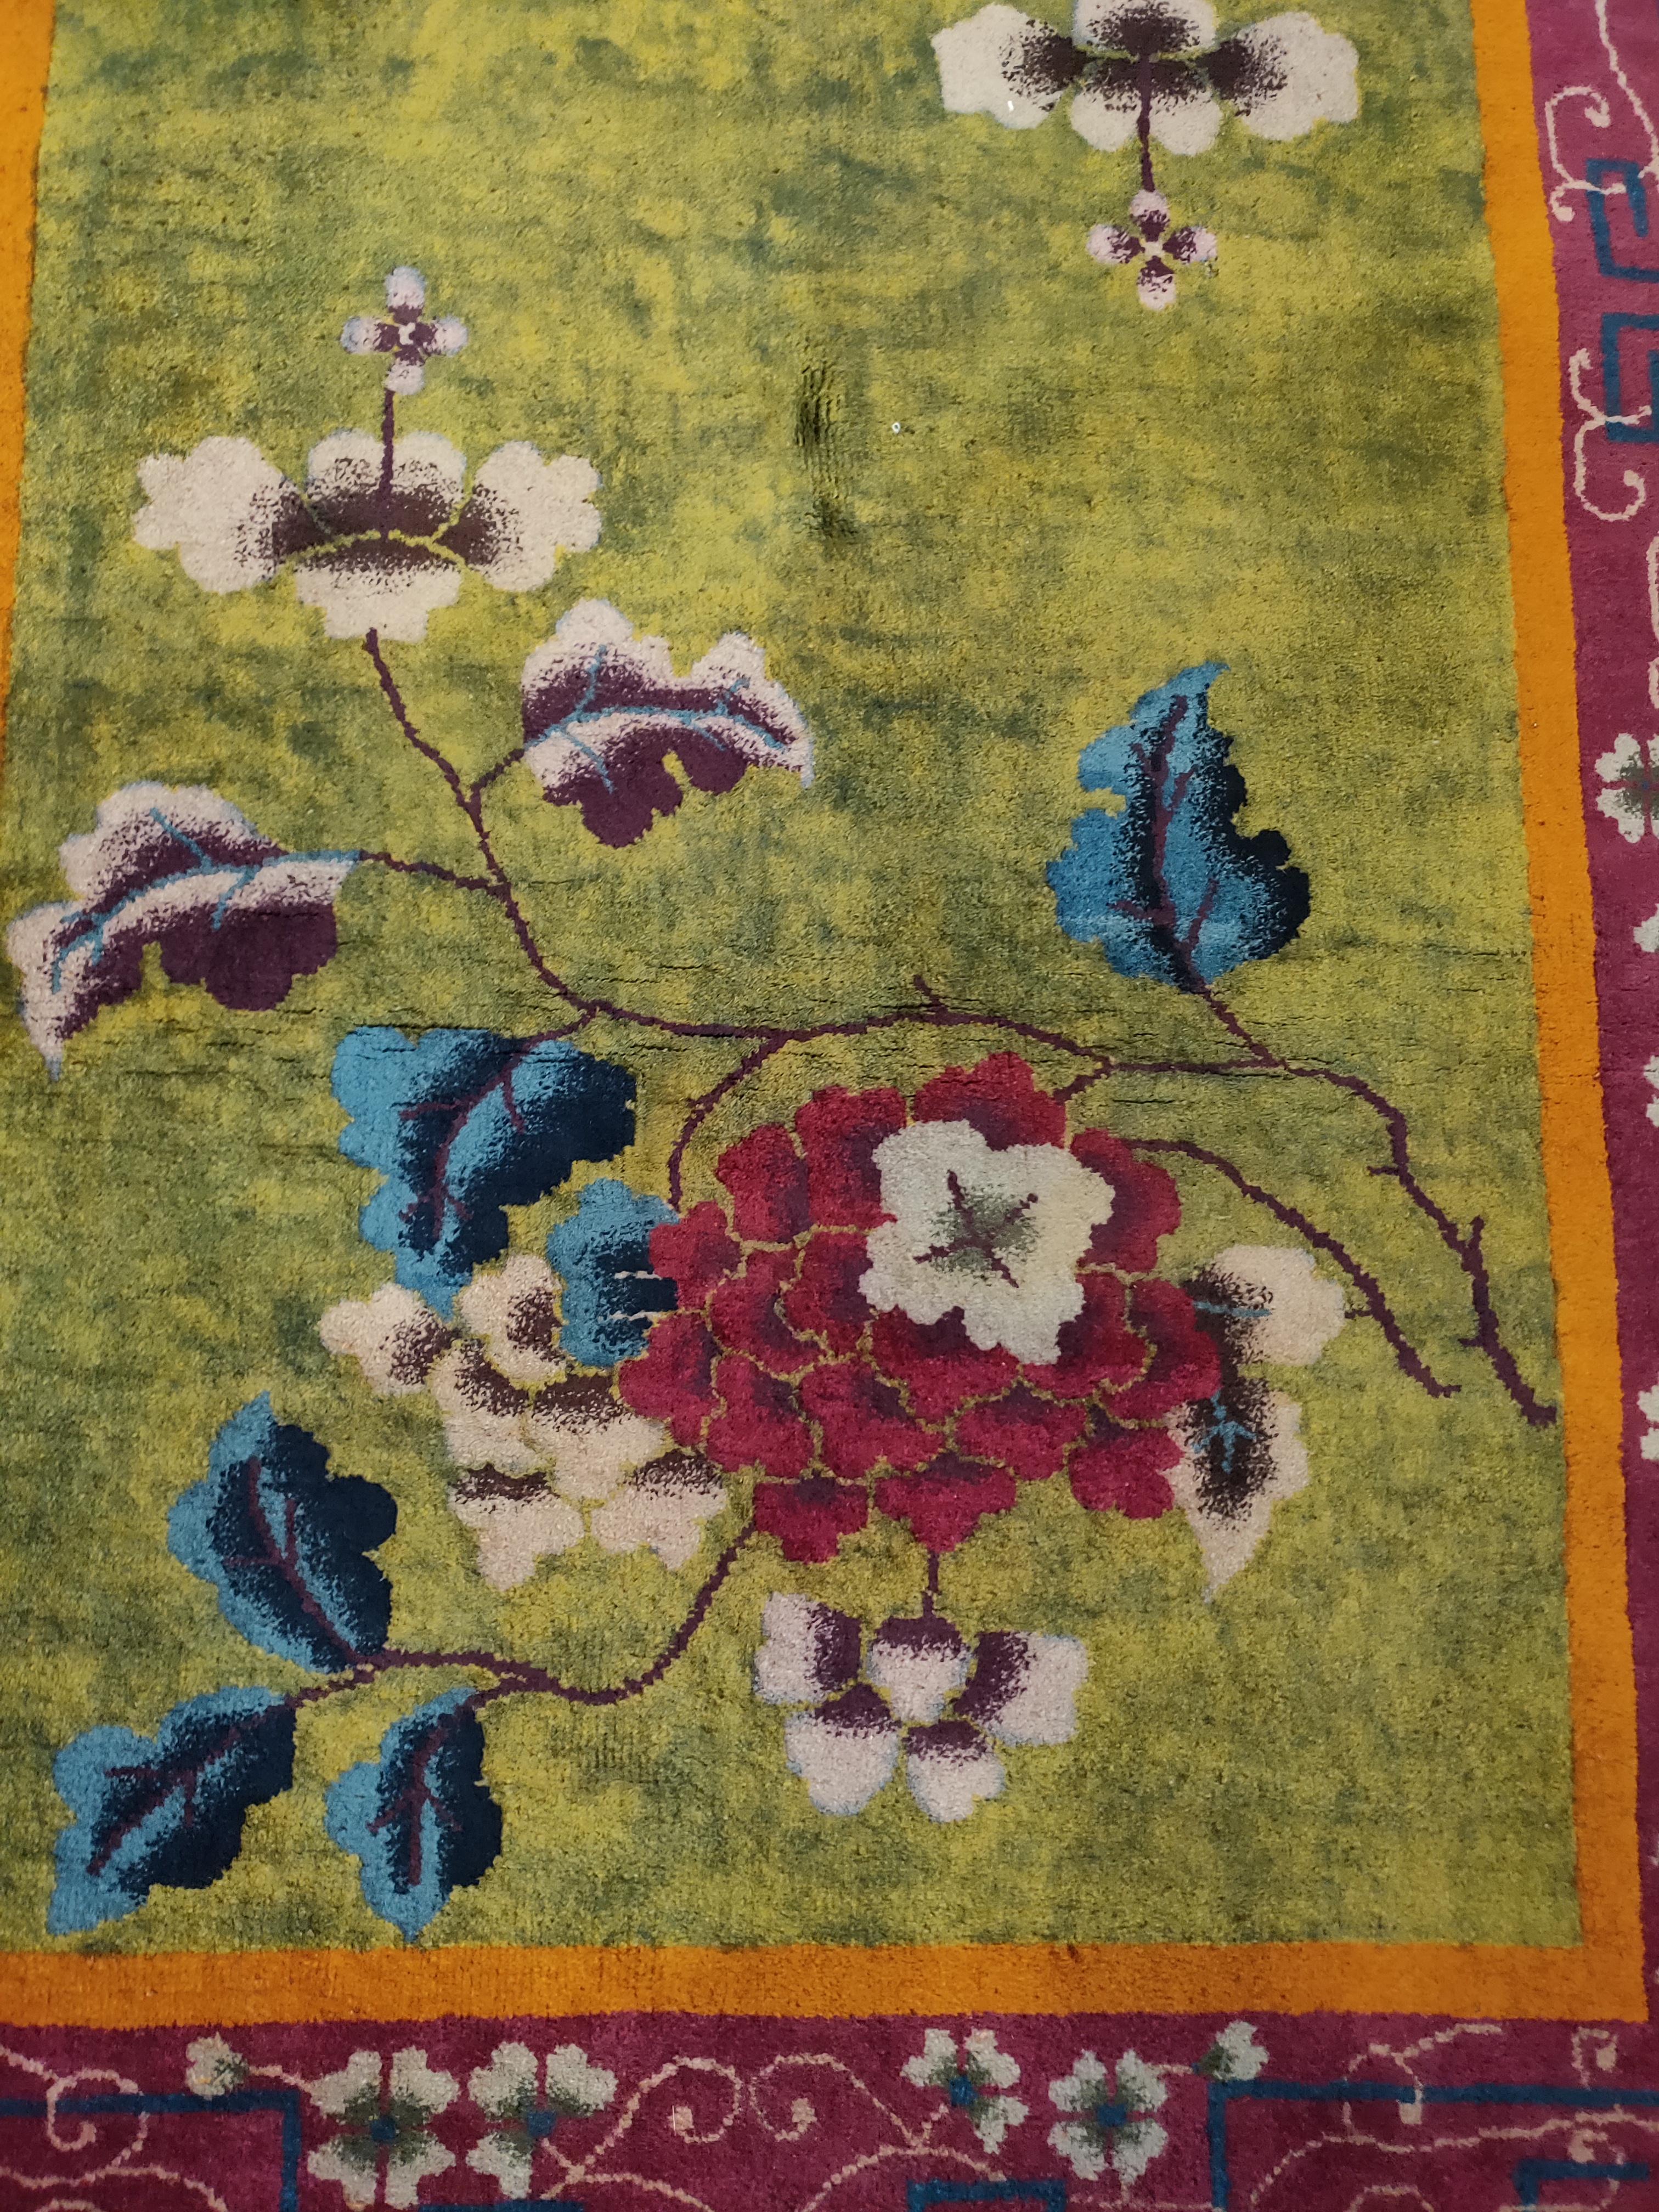 Peony sprays with giant flowers at each end of a grass green field decorate the field of this 1920s rug. A
raspberry and tendril main border attractively frames the composition. Measures: 4'0